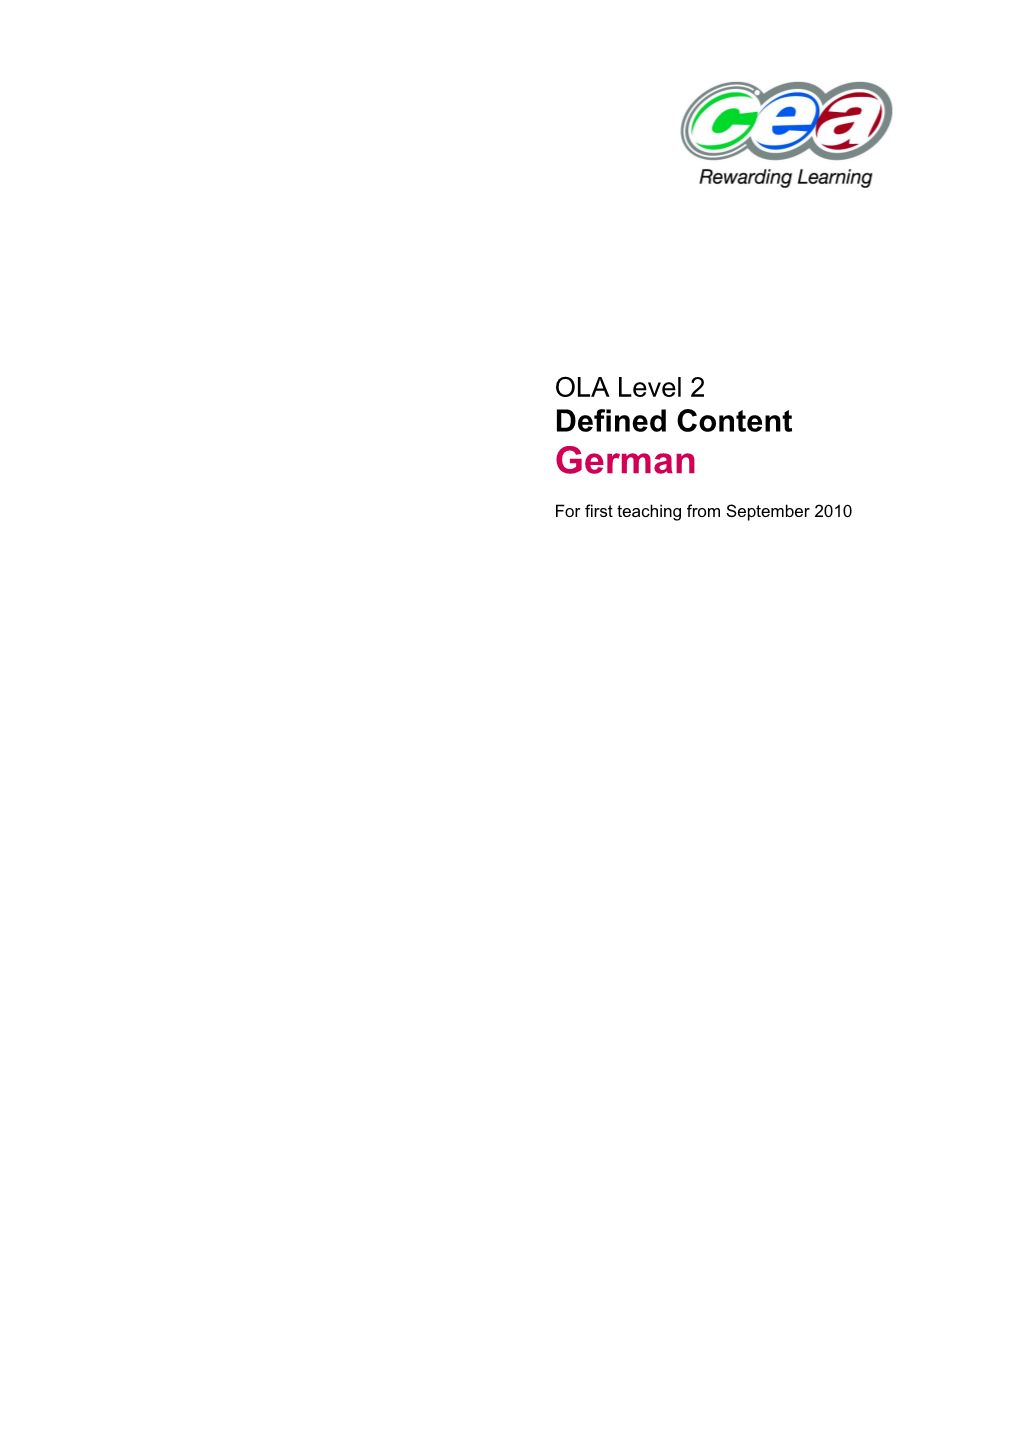 Note to Users: Defined Content for OLA